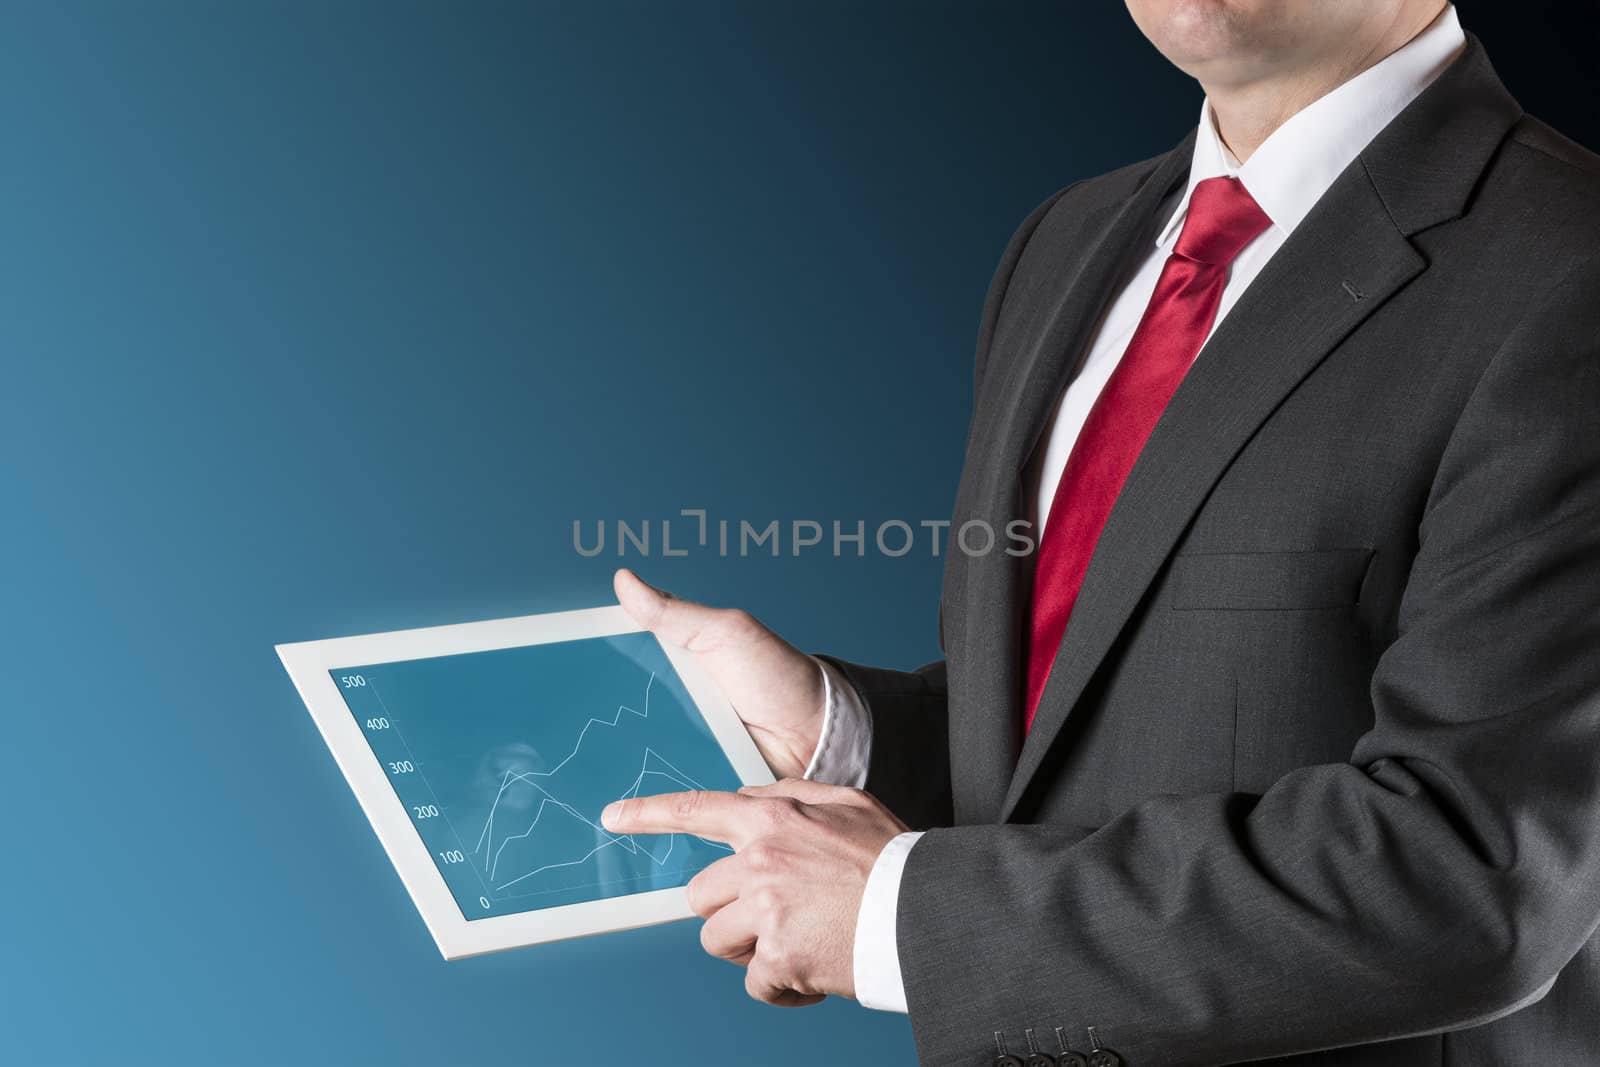 Well dressed business man is holding a tablet computer that is showing a stock chart. Background is blue / black.